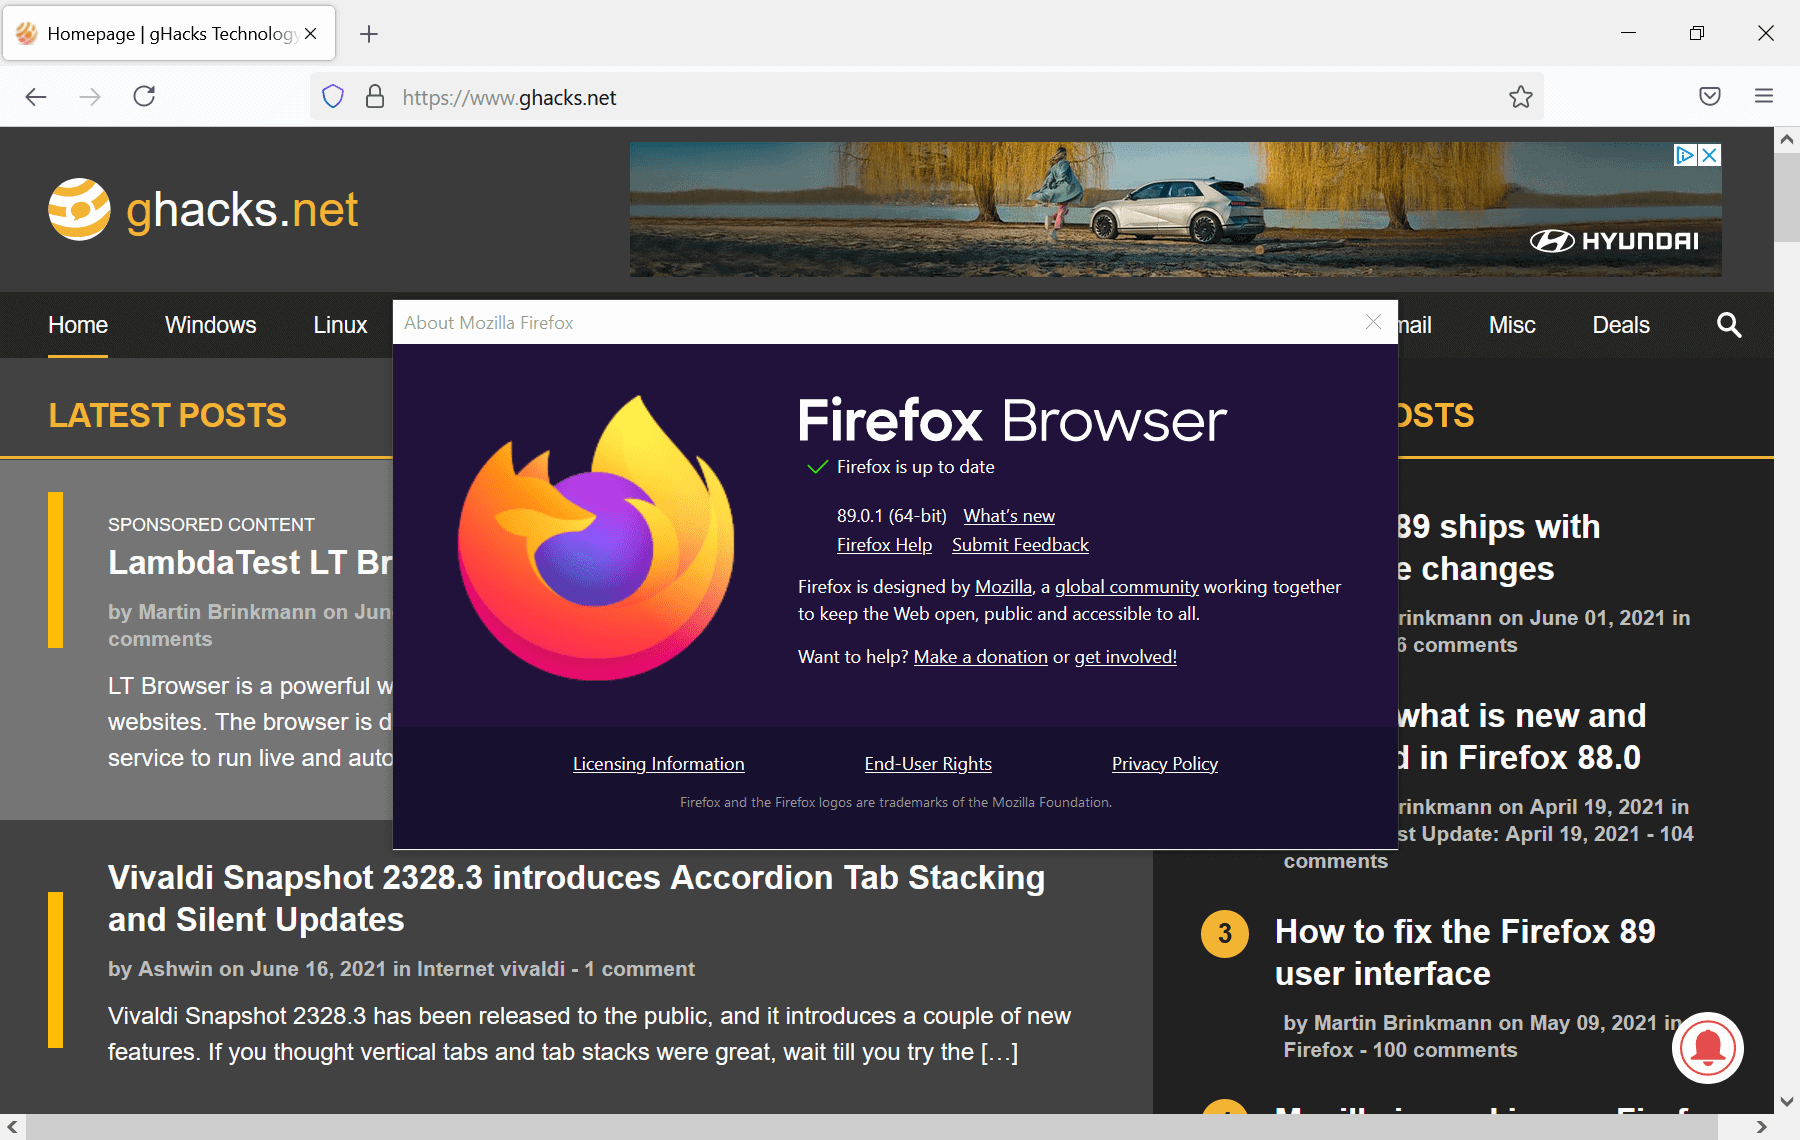 Firefox 89.0.1 security update is now available